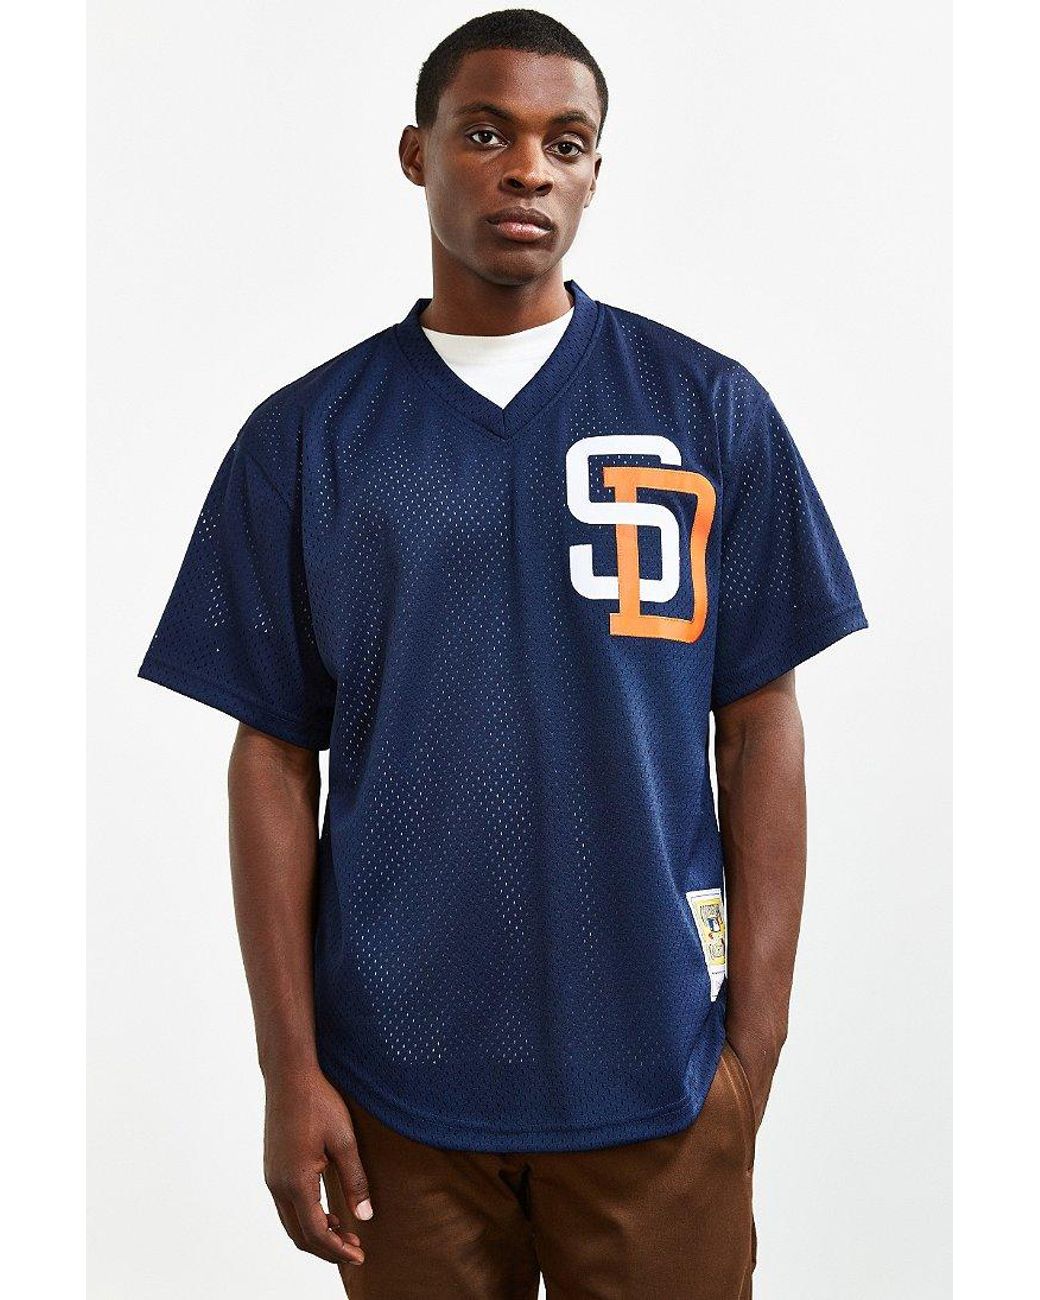 mitchell and ness san diego padres